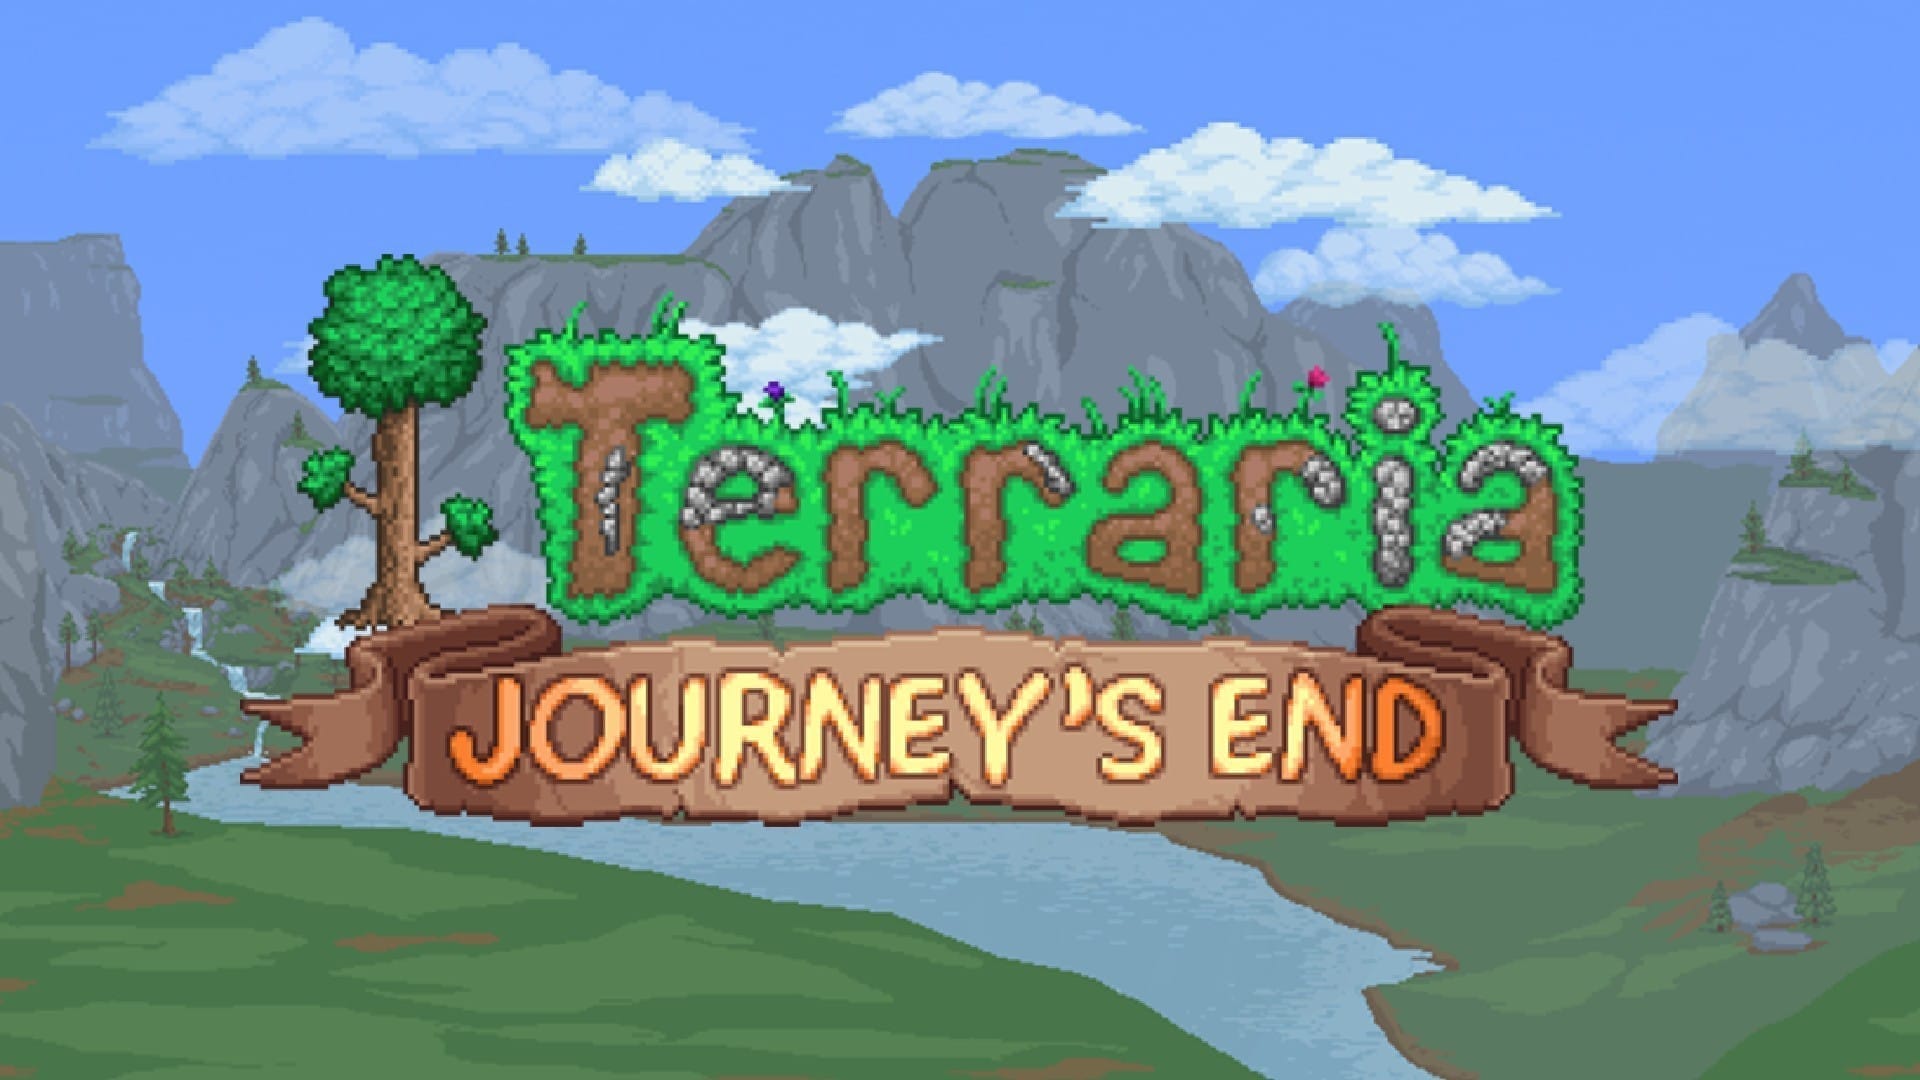 start of my journey mode world download for free :/ : r/Terraria